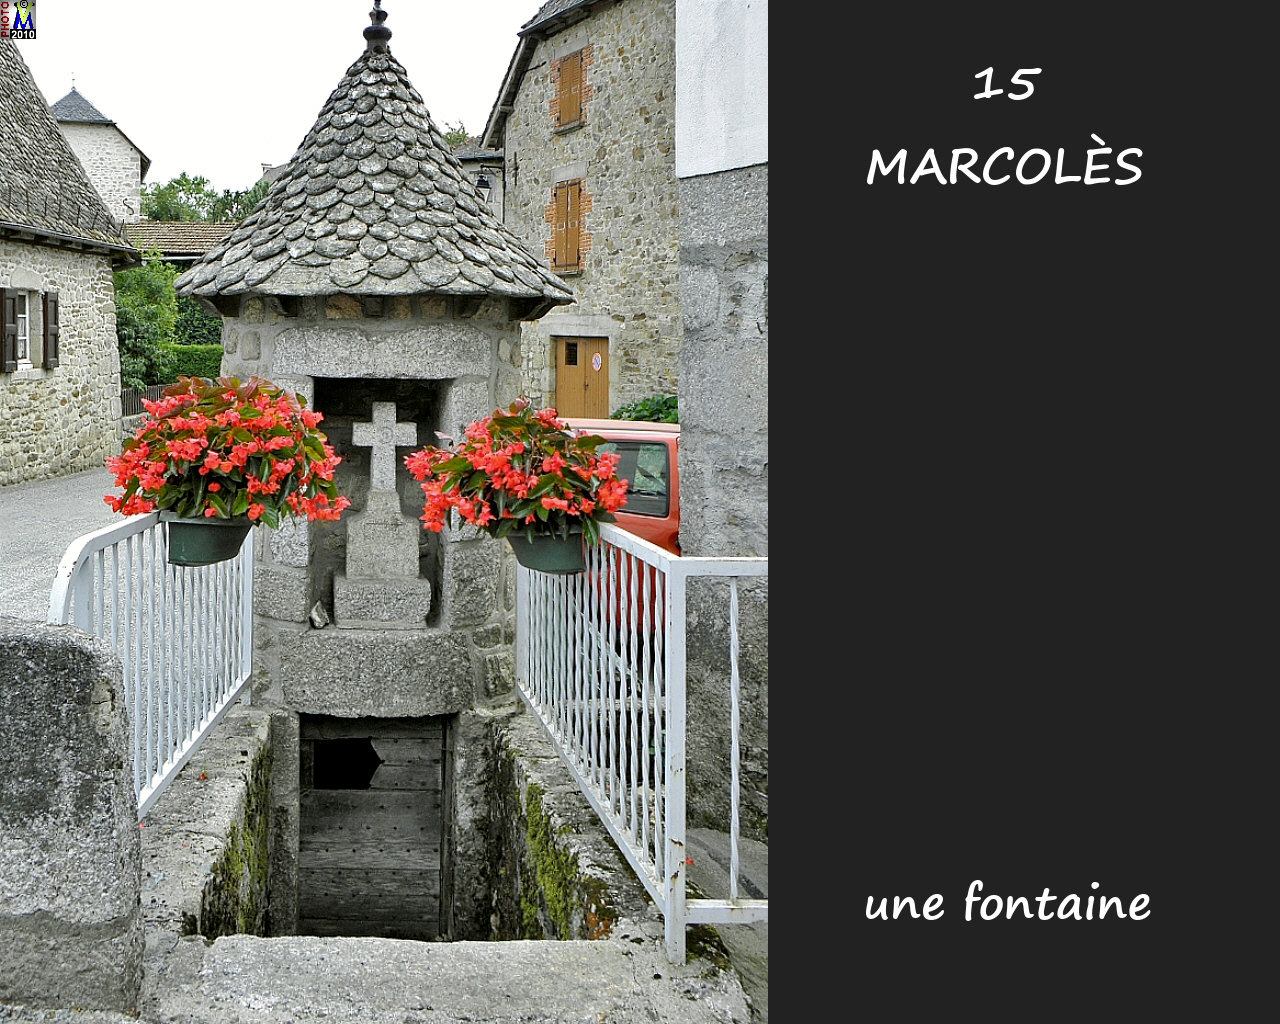 15MARCOLES_fontaine_102.jpg